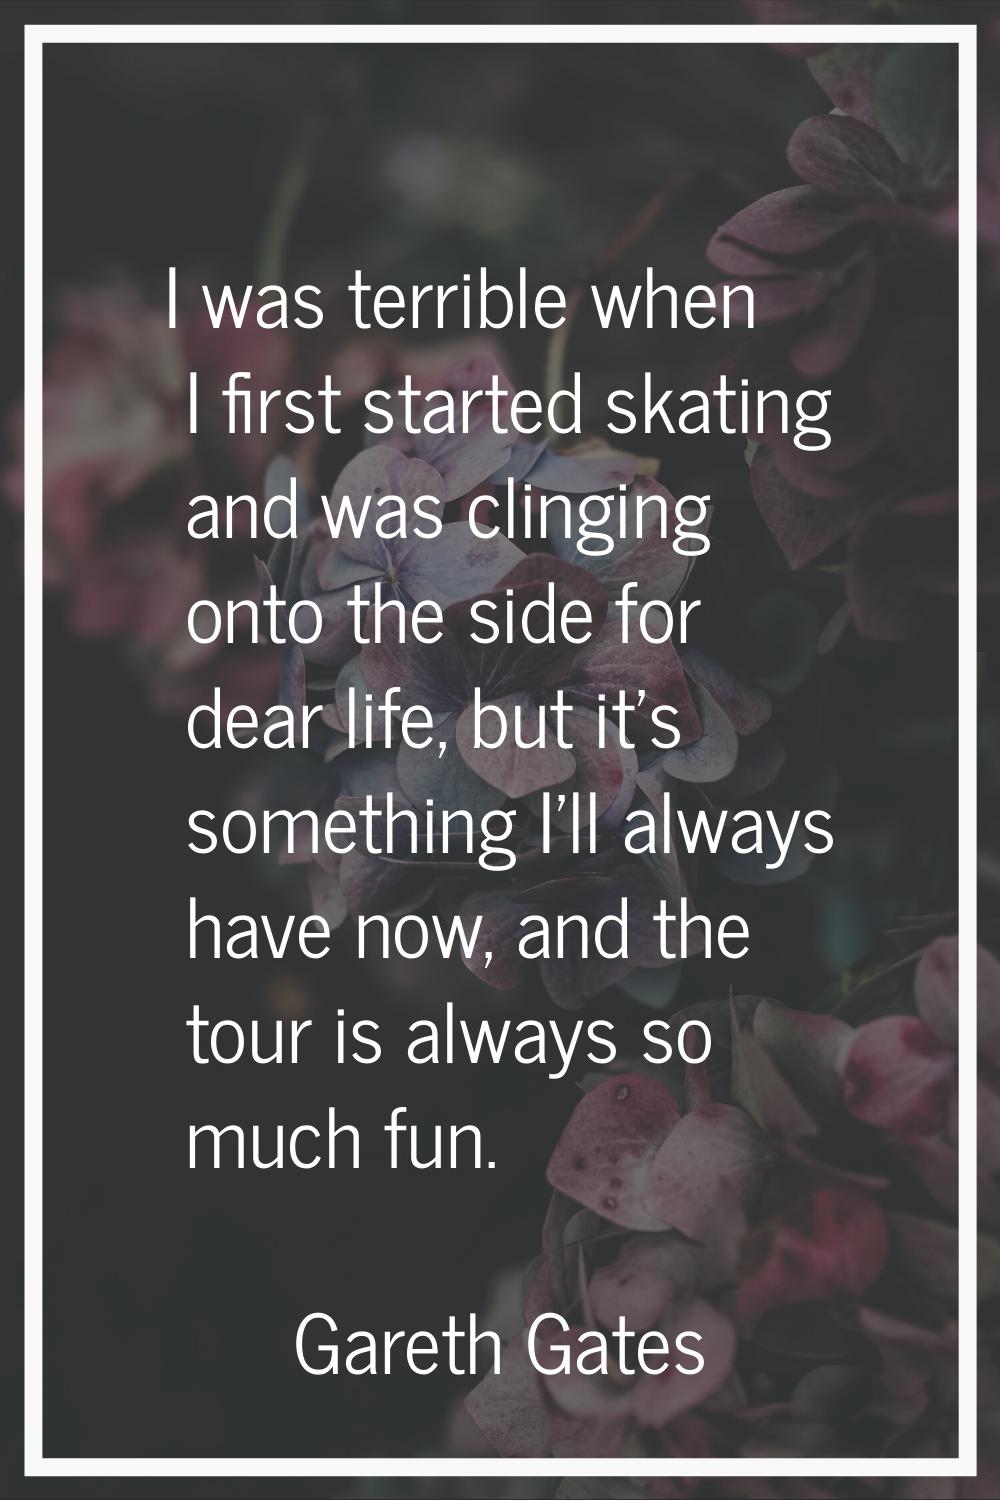 I was terrible when I first started skating and was clinging onto the side for dear life, but it's 